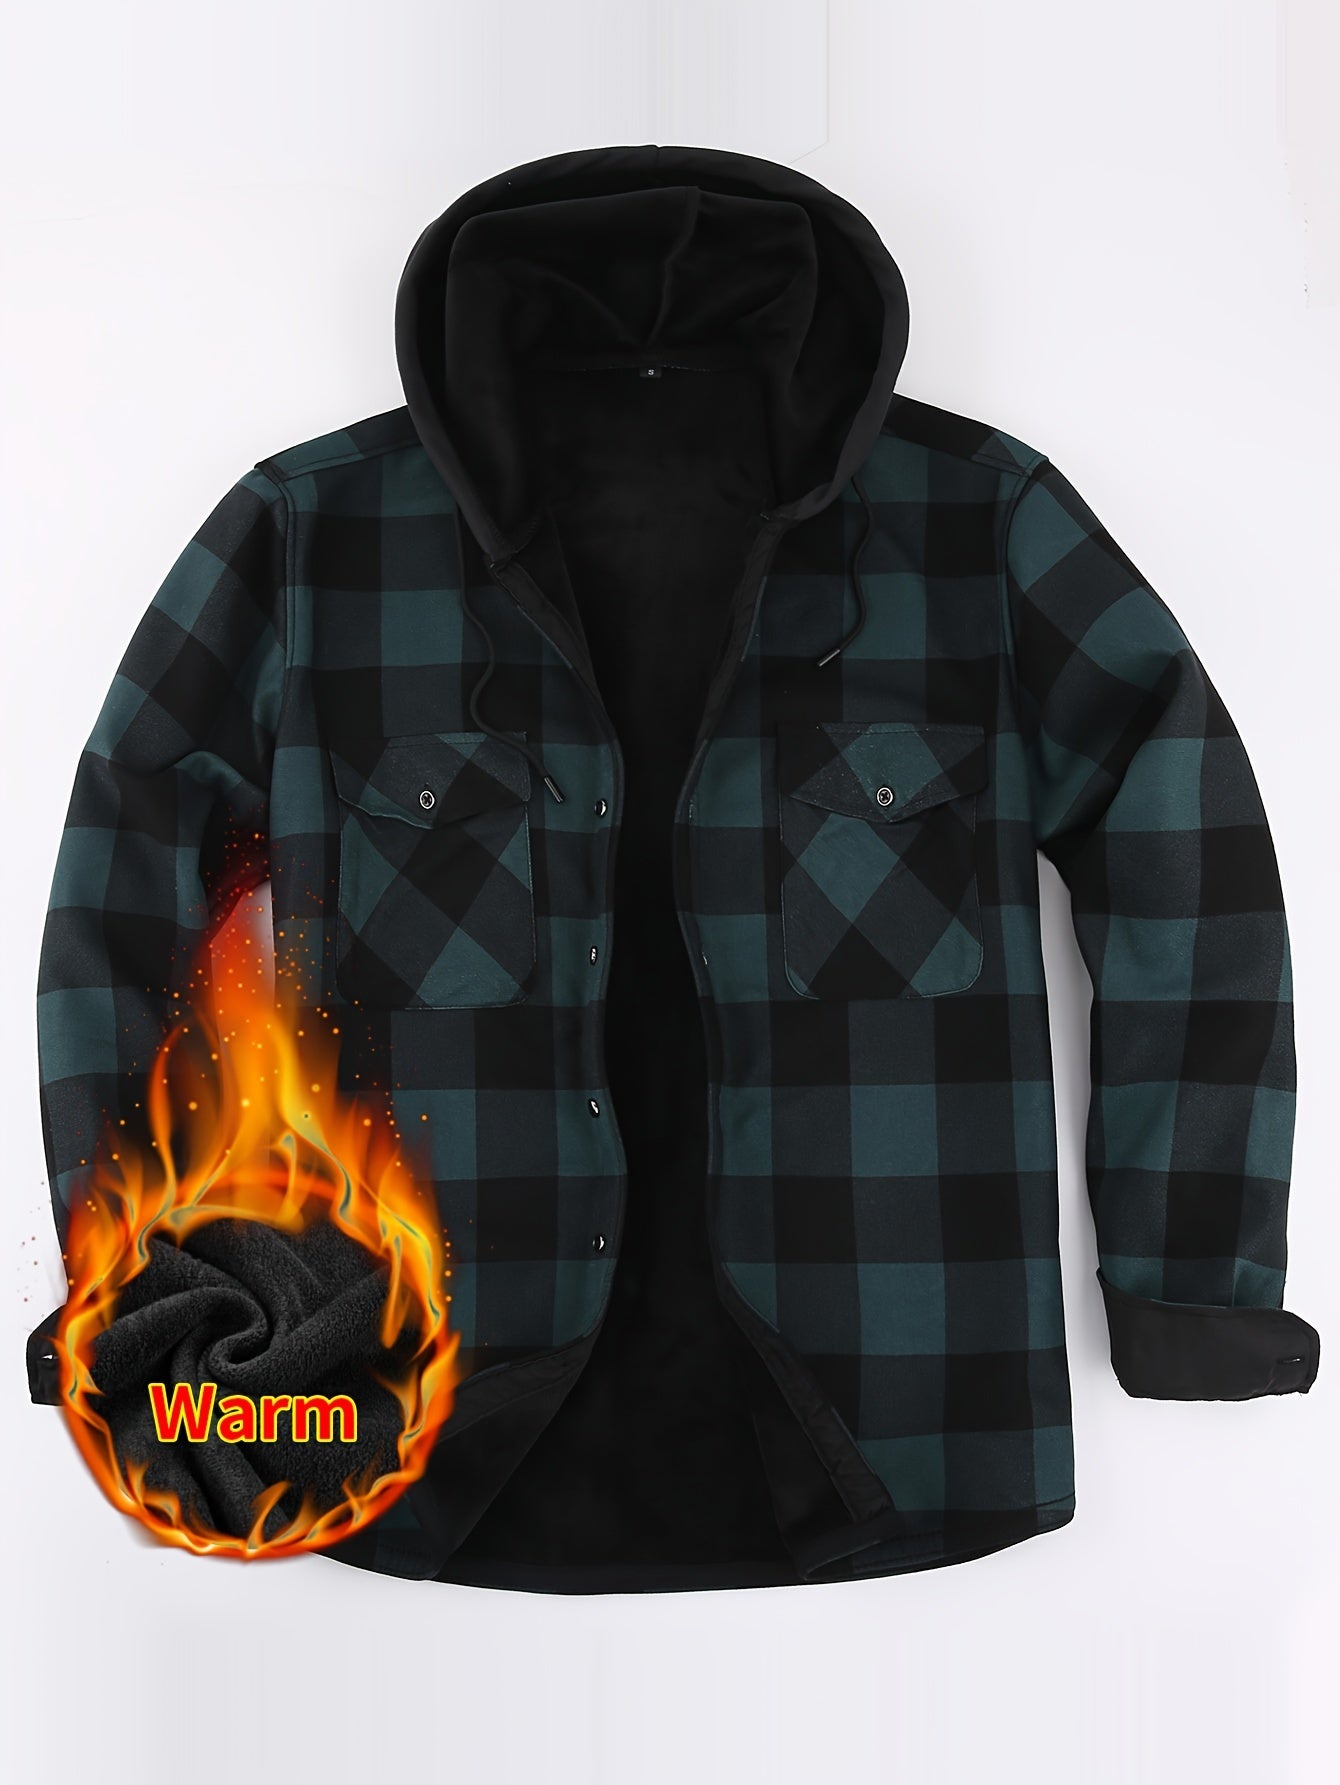 Plus Fleece Warm Daily Men's Plaid Pattern Long Sleeve Hooded Button Shirt For Fall Winter Outdoor, Men's Casual Color Block Shirt Jacket